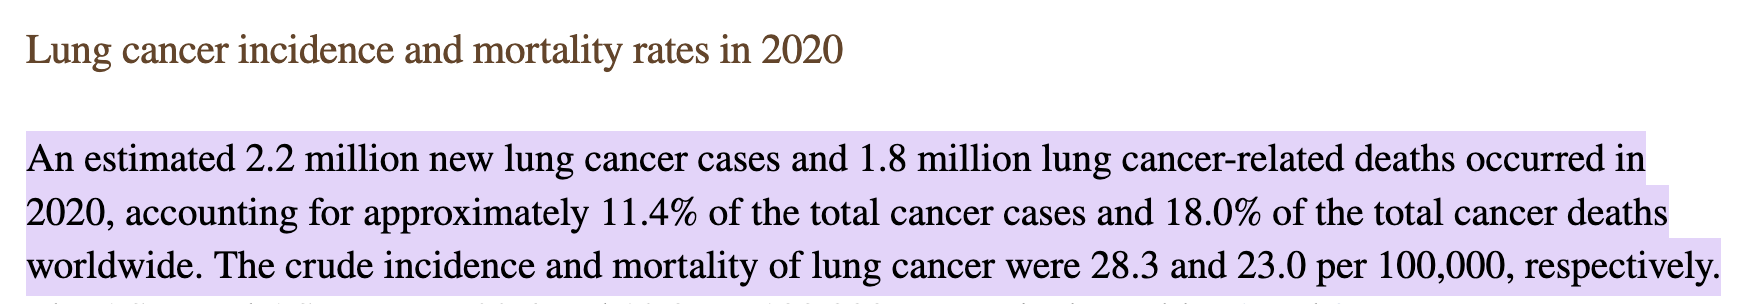 Lung Cancer Incidence